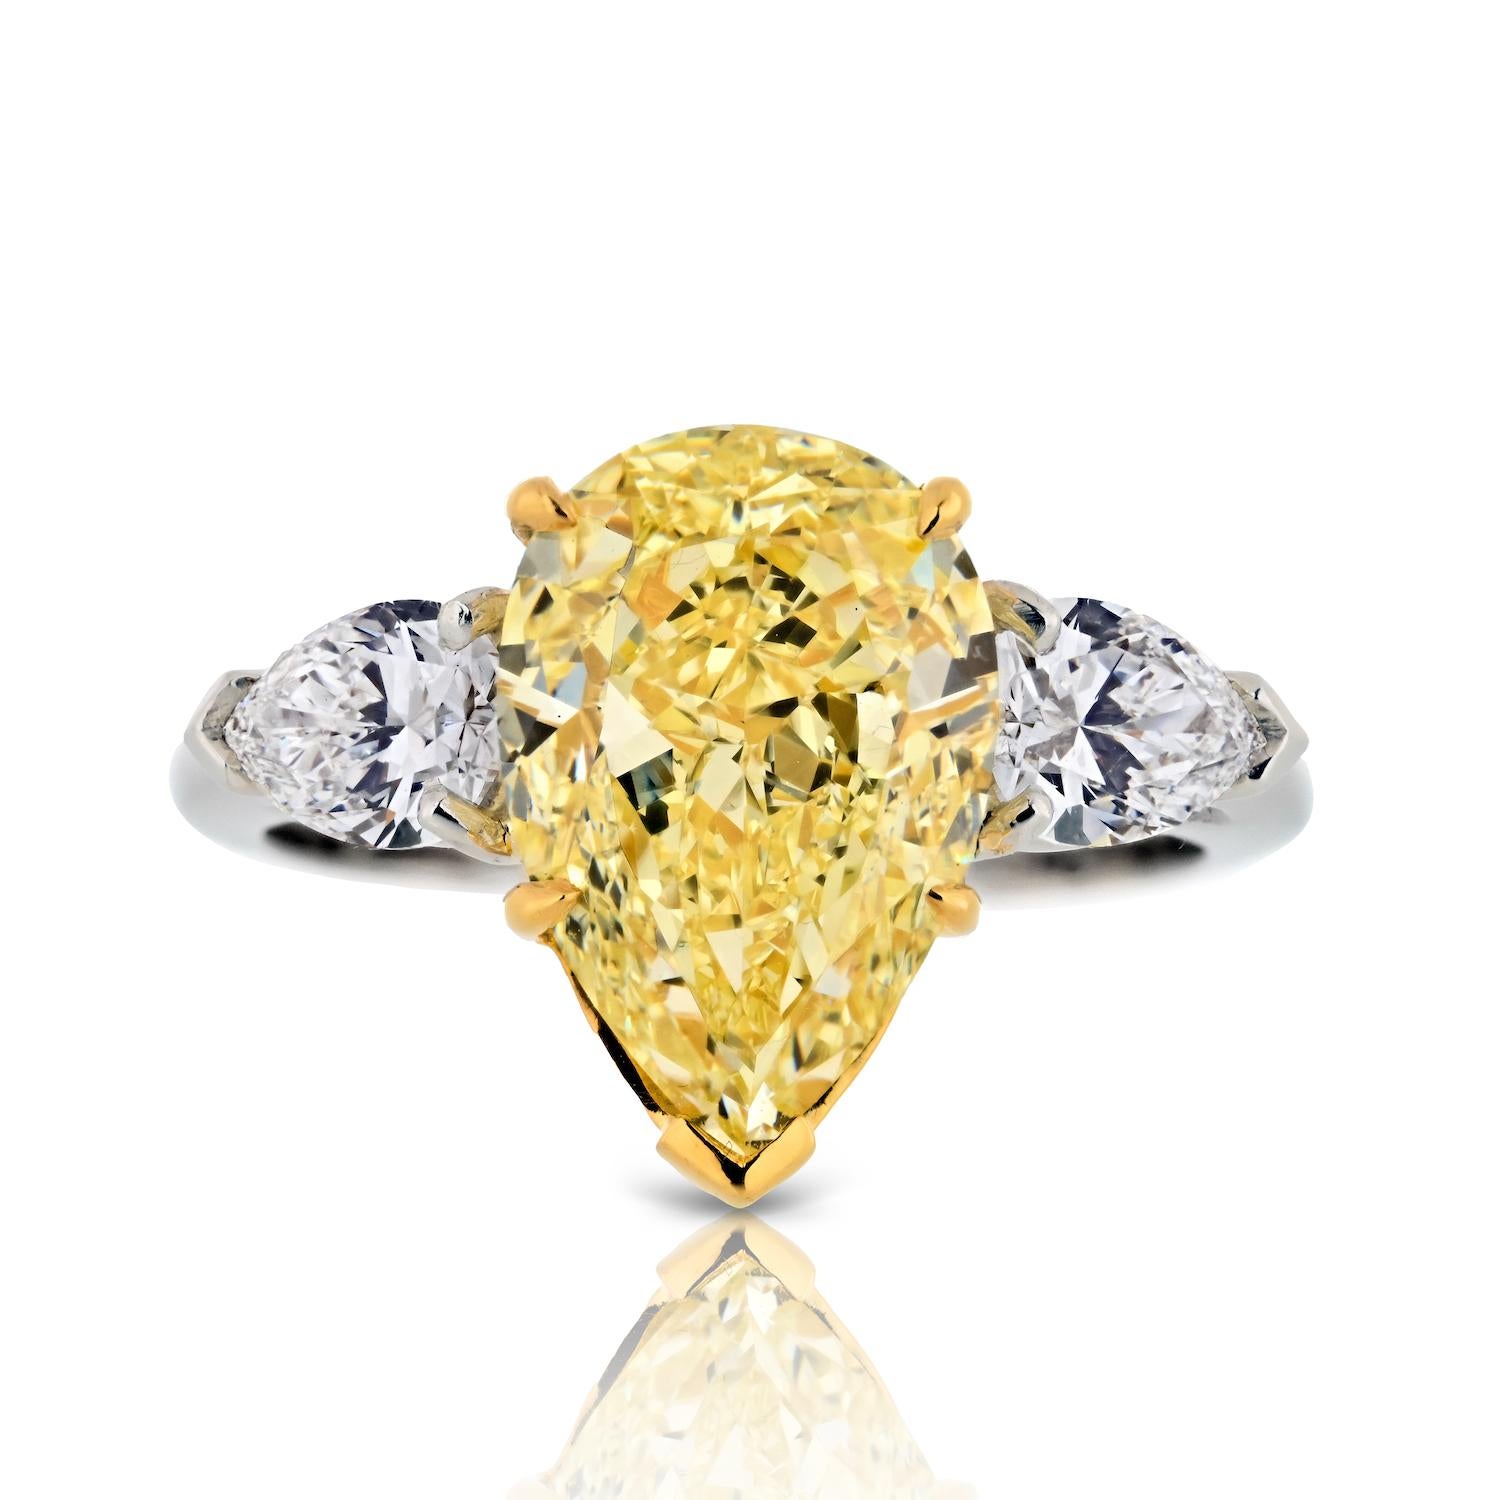 Elevate your love story with the enchanting beauty of this 5 Carat Pear Shape Fancy Yellow Three Stone Diamond Engagement Ring, a masterpiece designed to captivate hearts and celebrate enduring love.

At the heart of this ring is a remarkable GIA